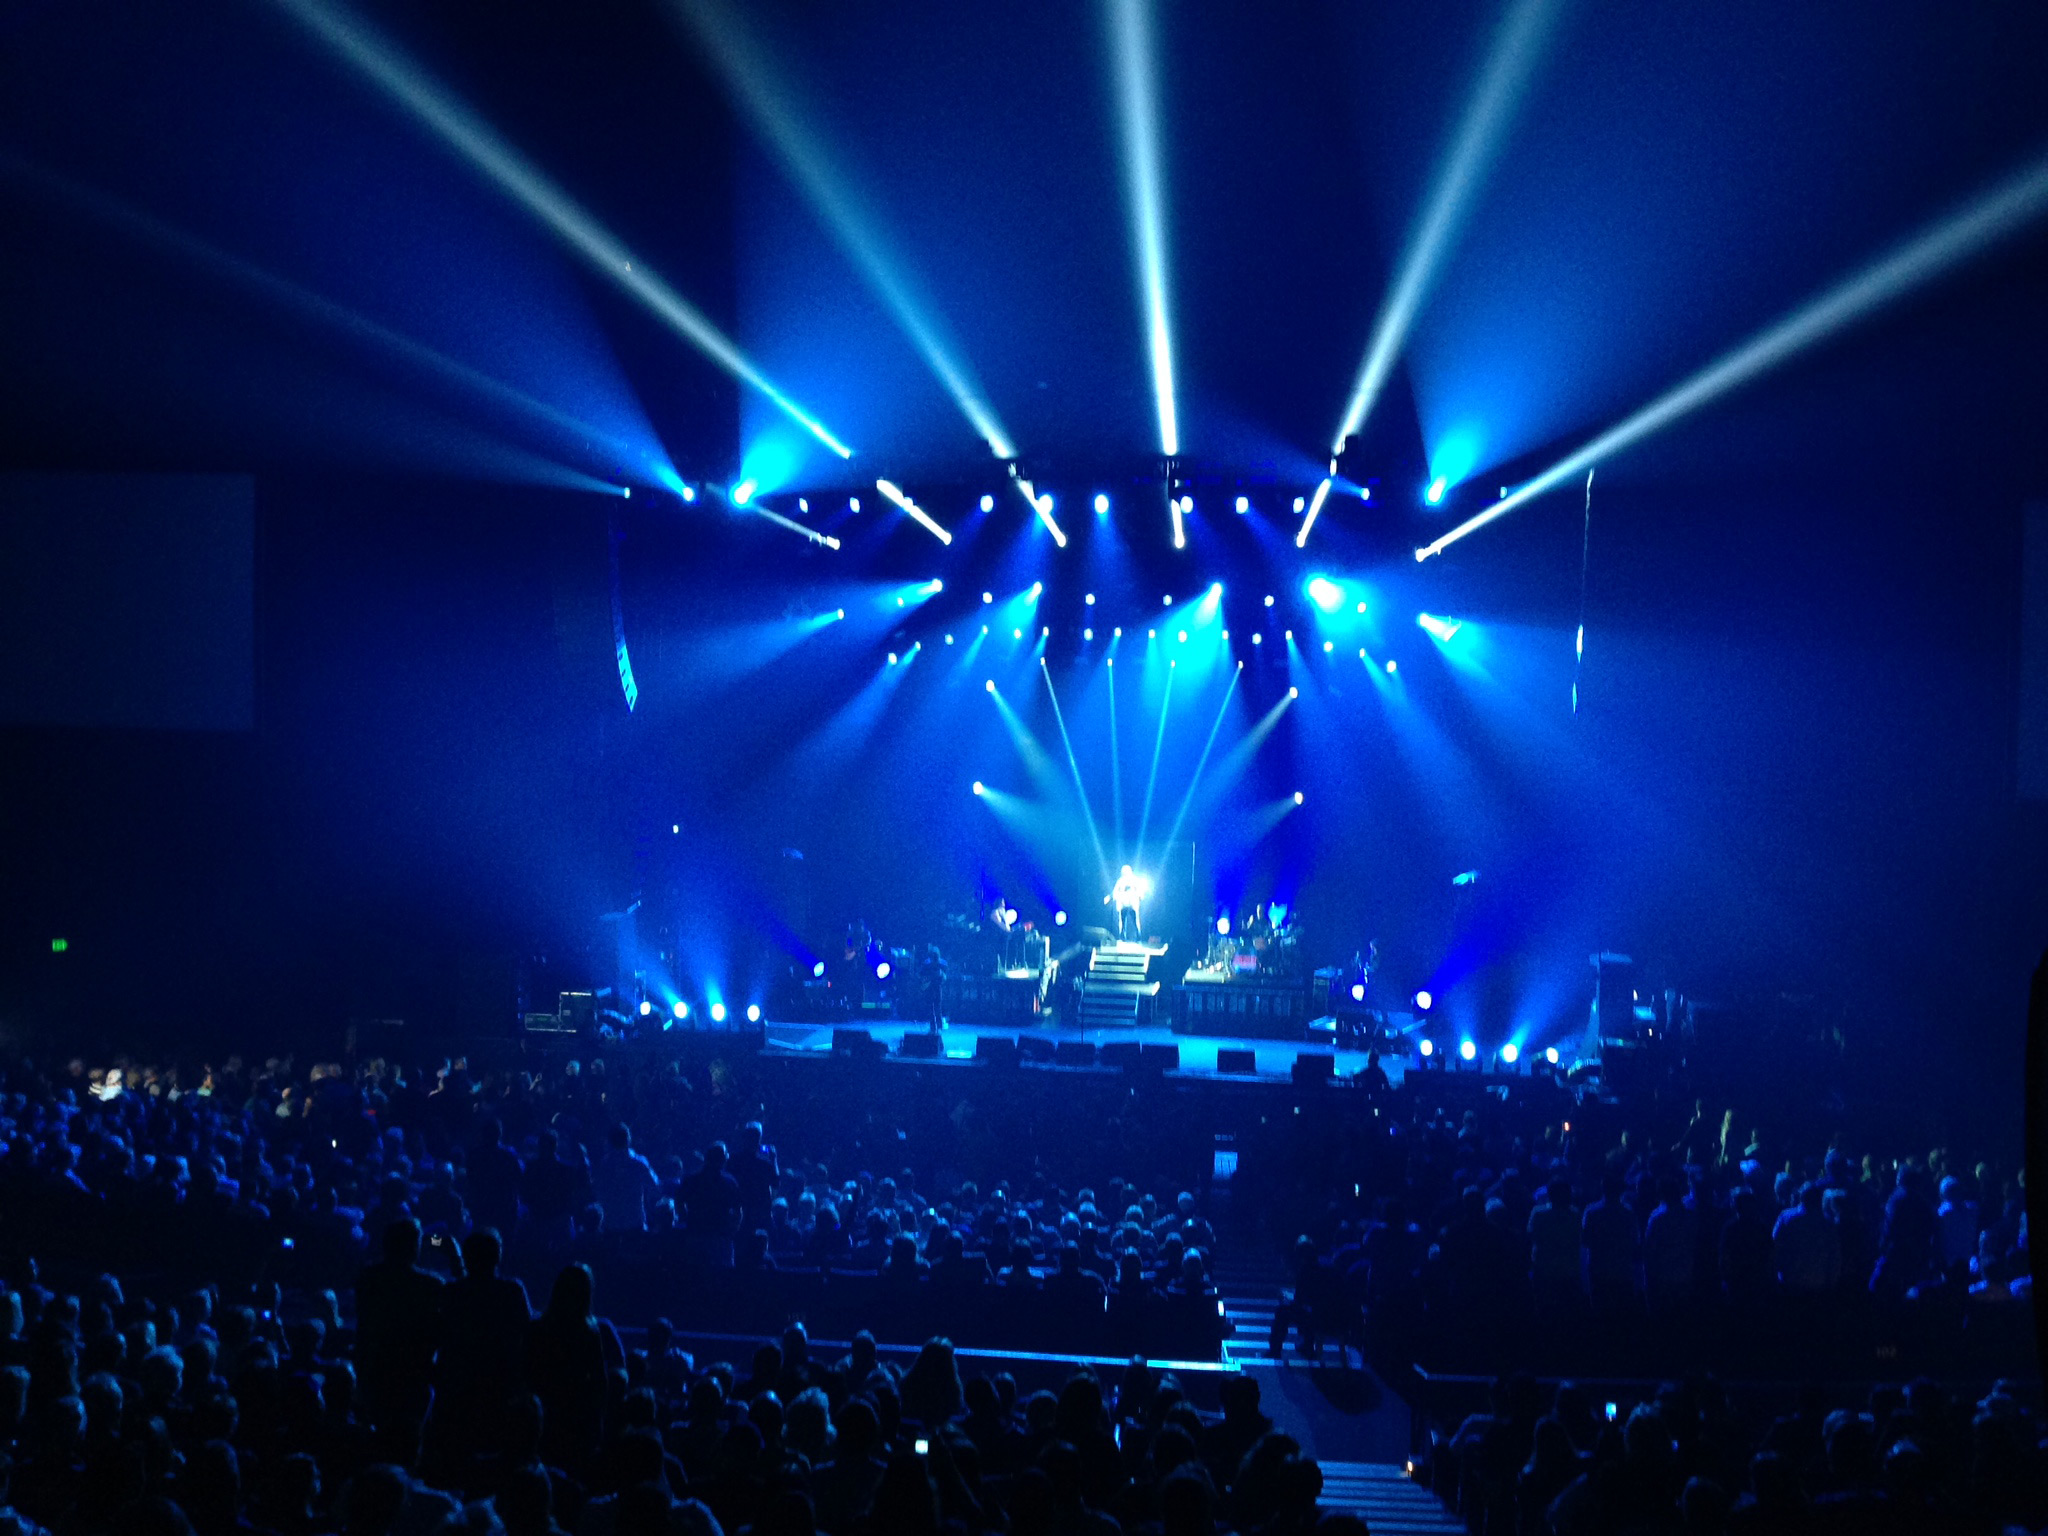 John Fogerty plays the classics on US tour backed by bright Martin Professional rig